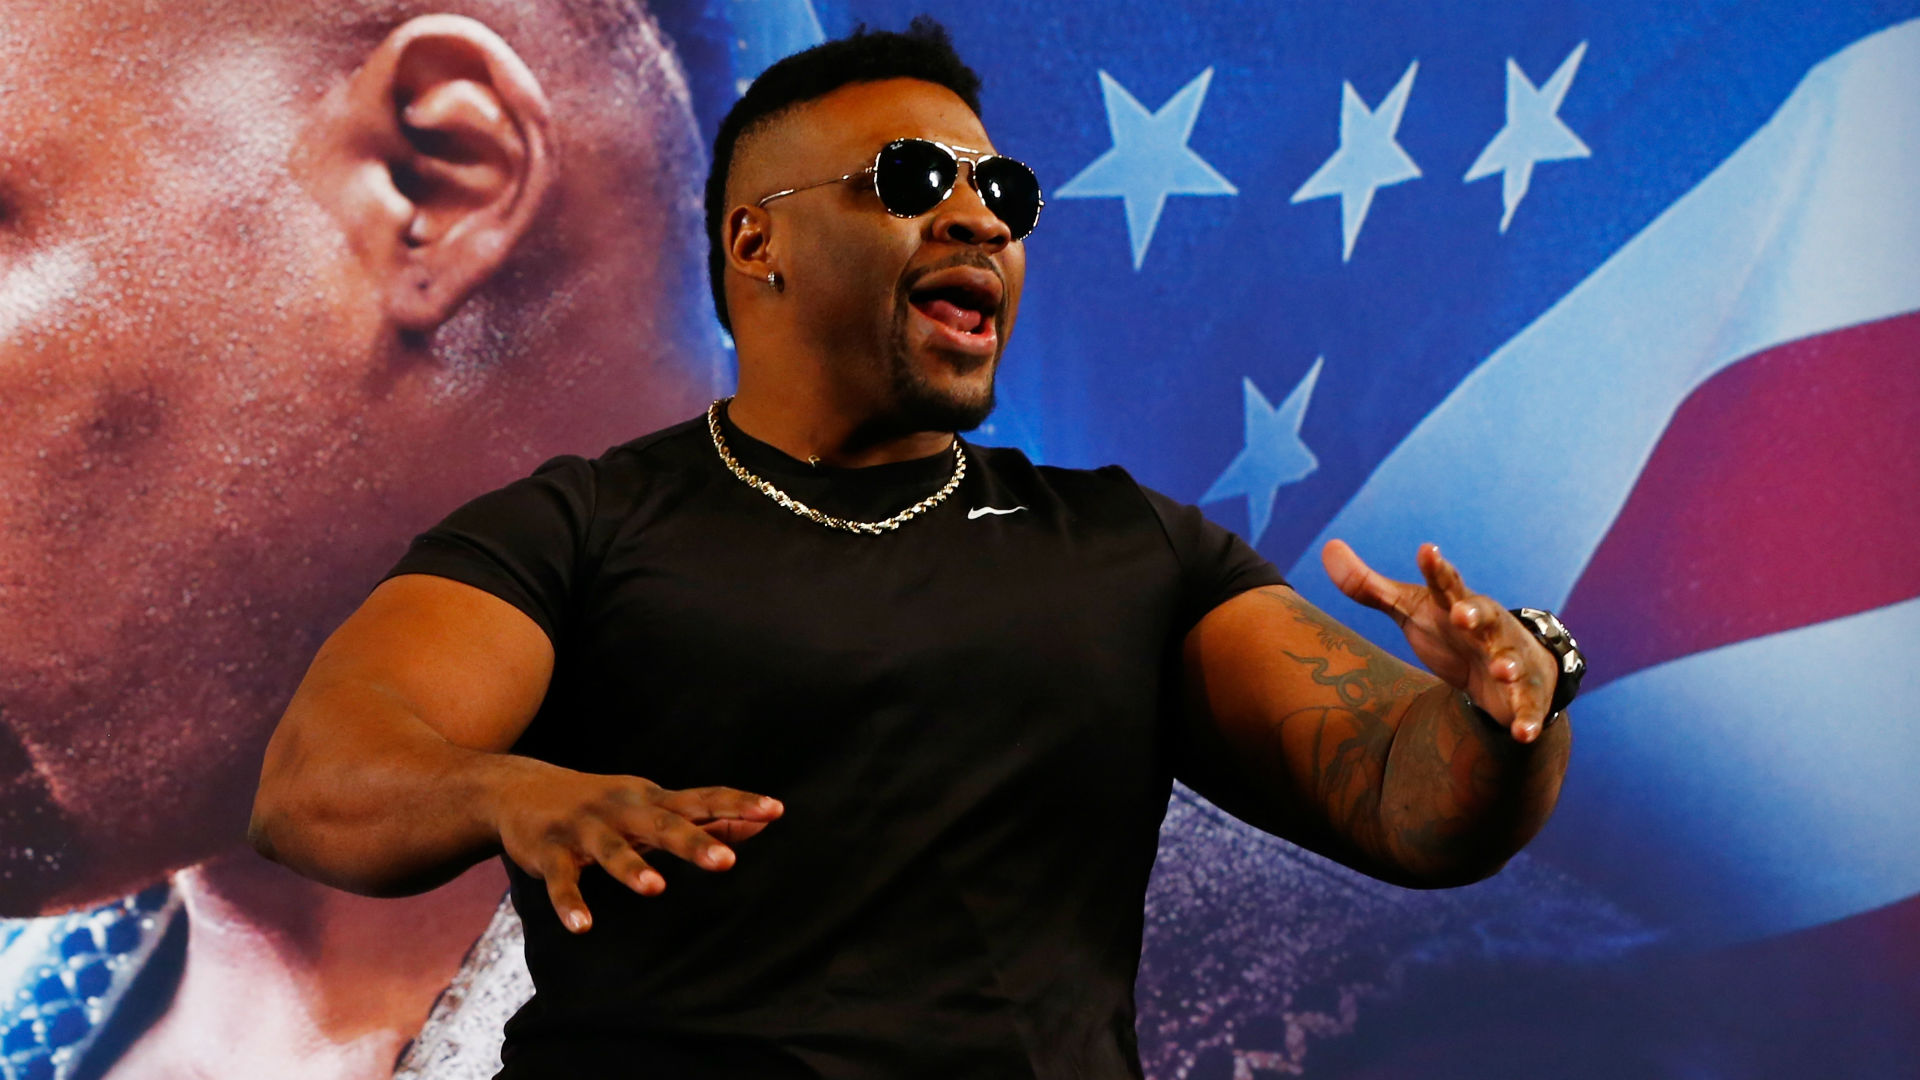 jarrell miller gives prediction for zhilei zhang vs. deontay wilder fight